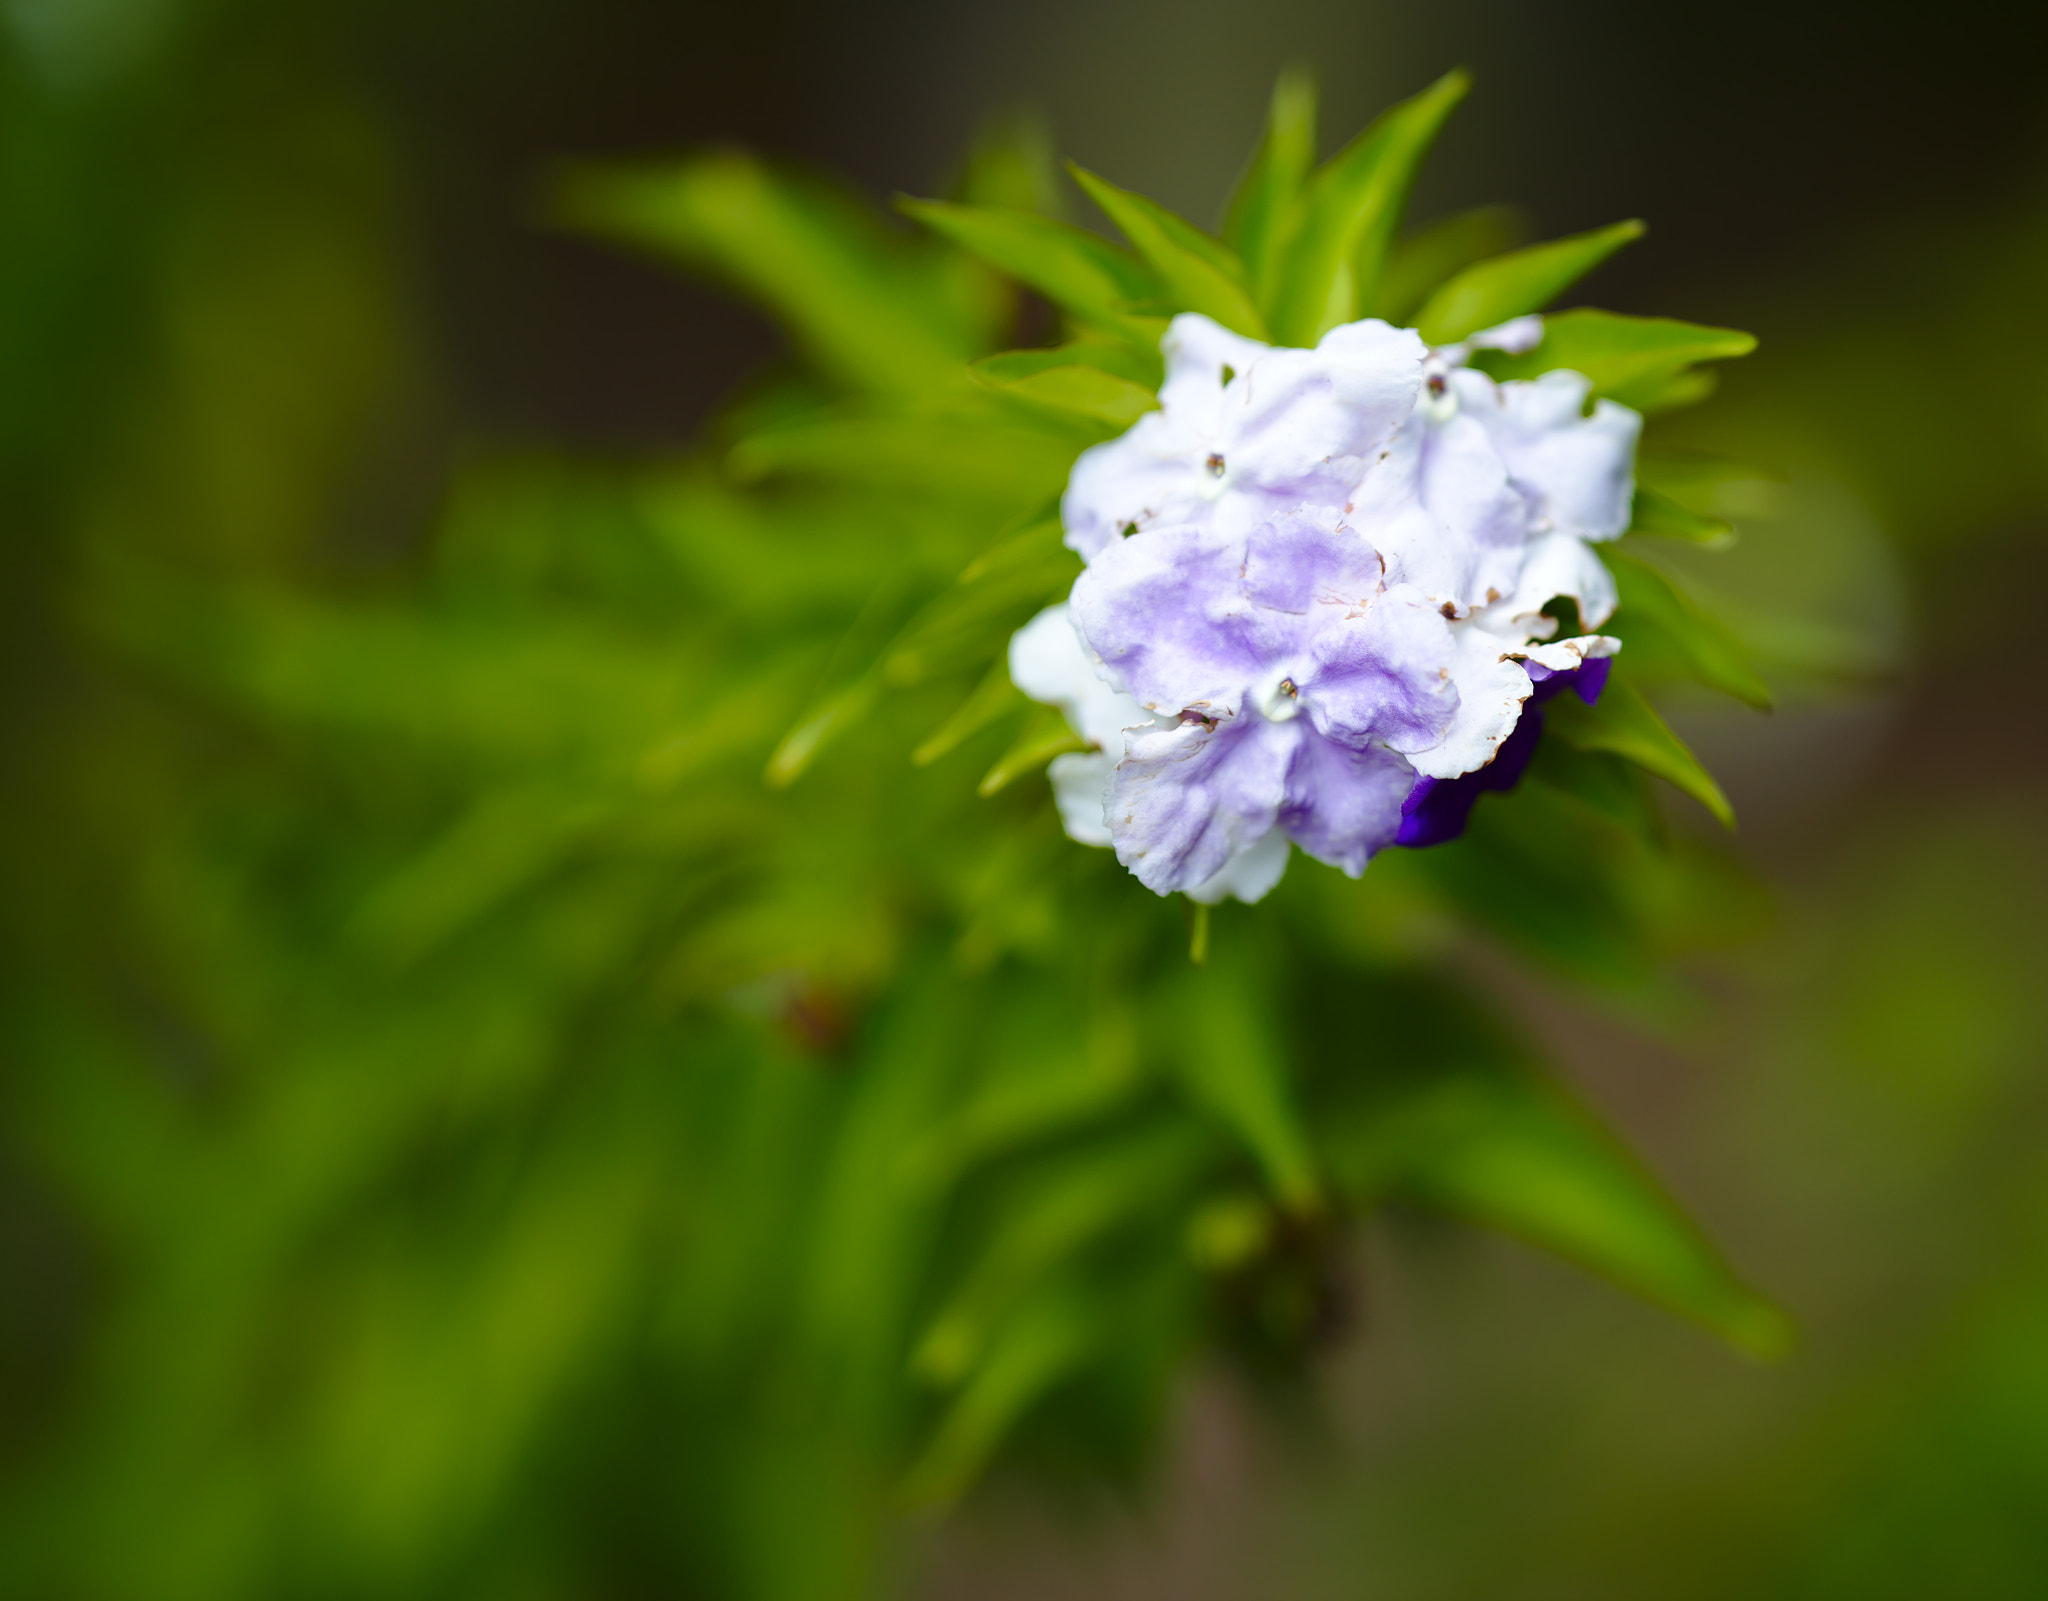 ZEISS Otus 85mm F1.4 sample photo. A white and purple flower photography